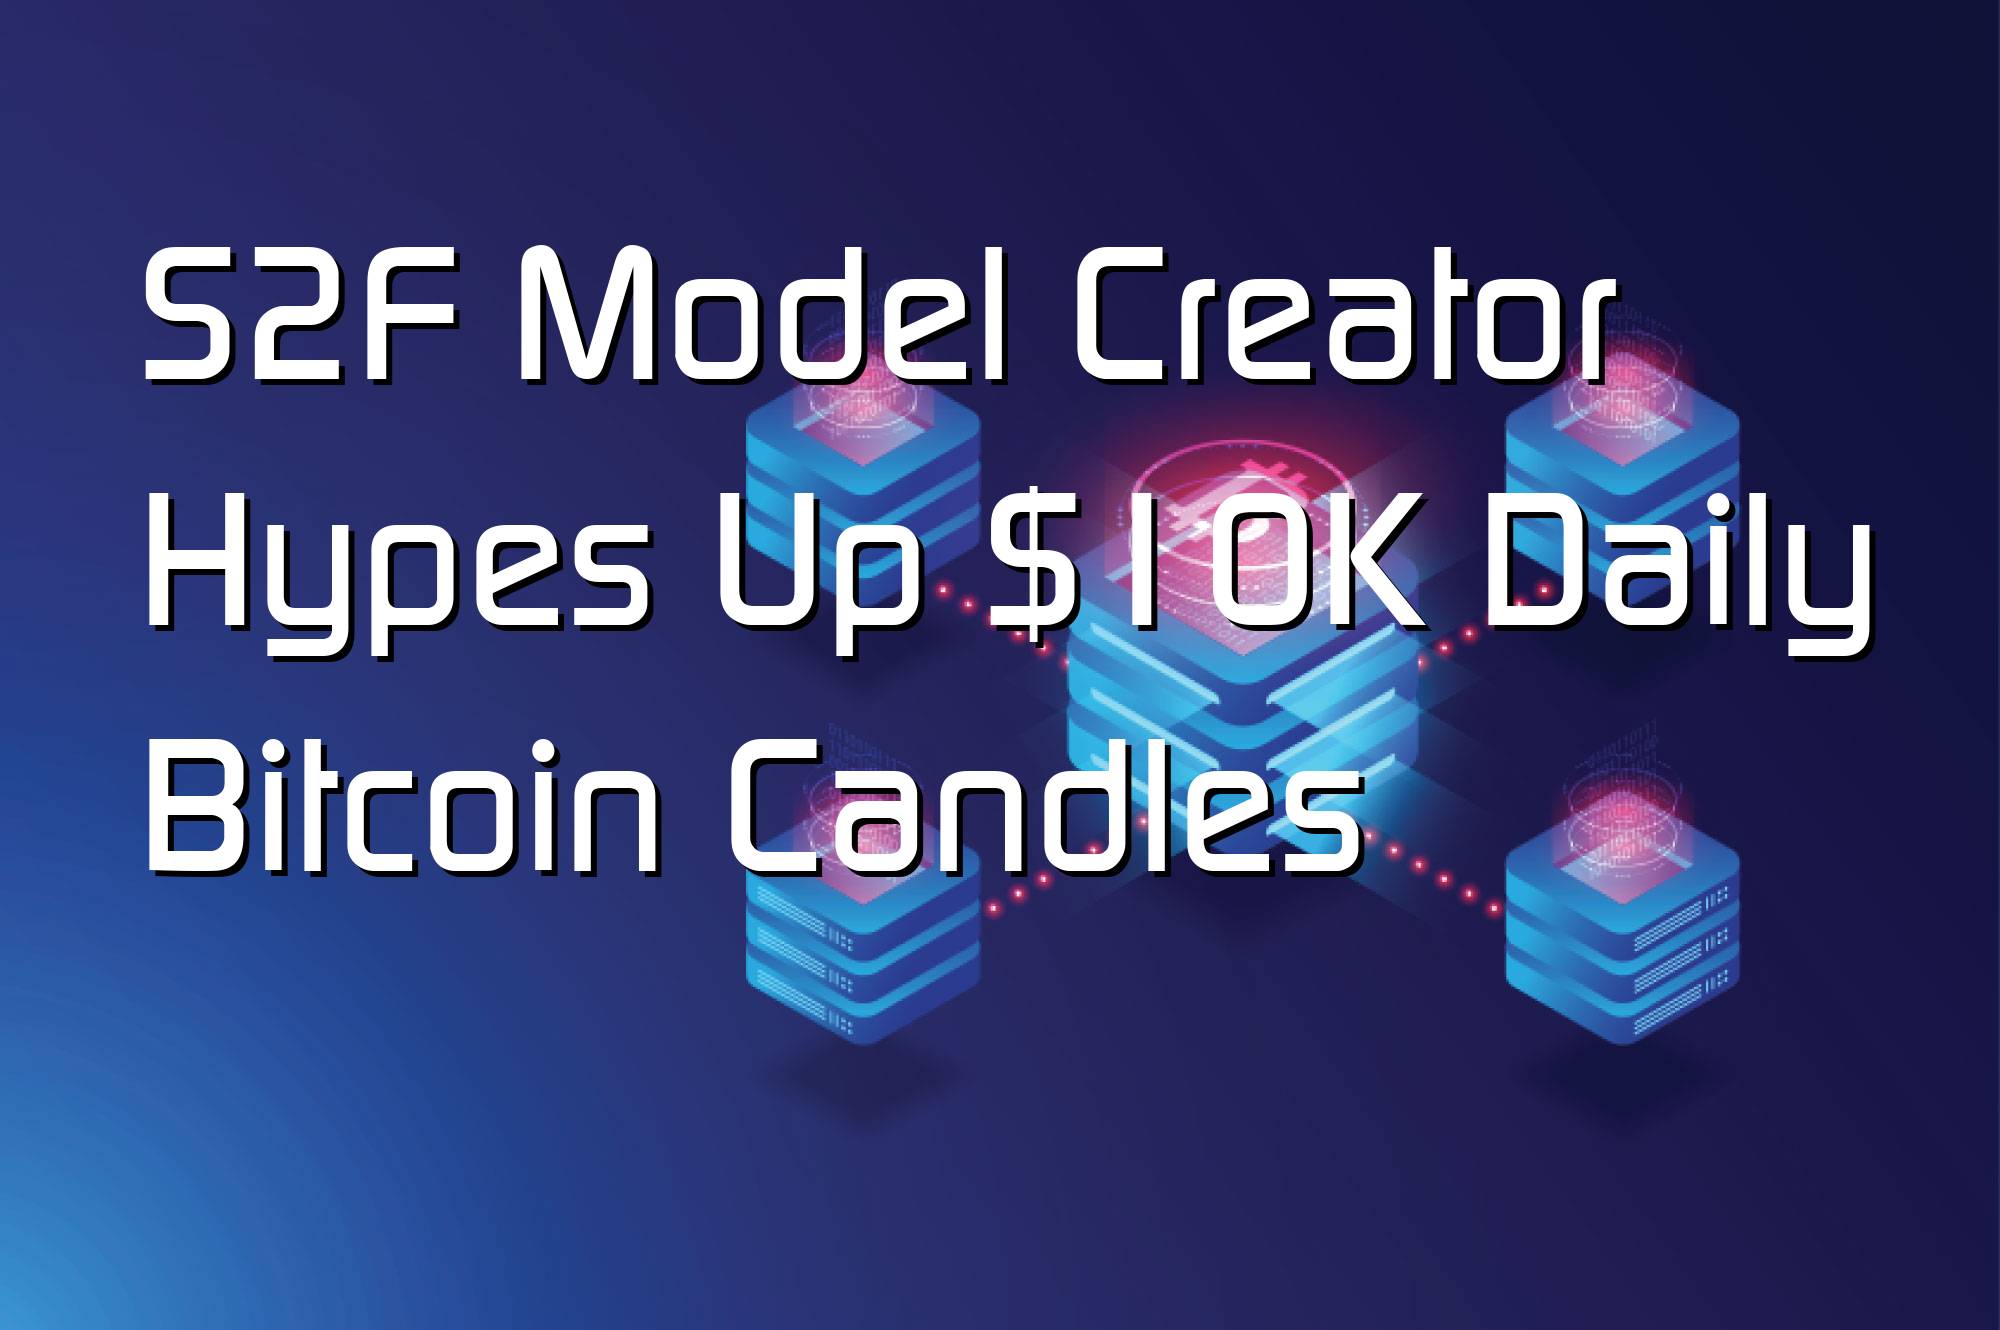 @$60982: S2F Model Creator Hypes Up $10K Daily Bitcoin Candles